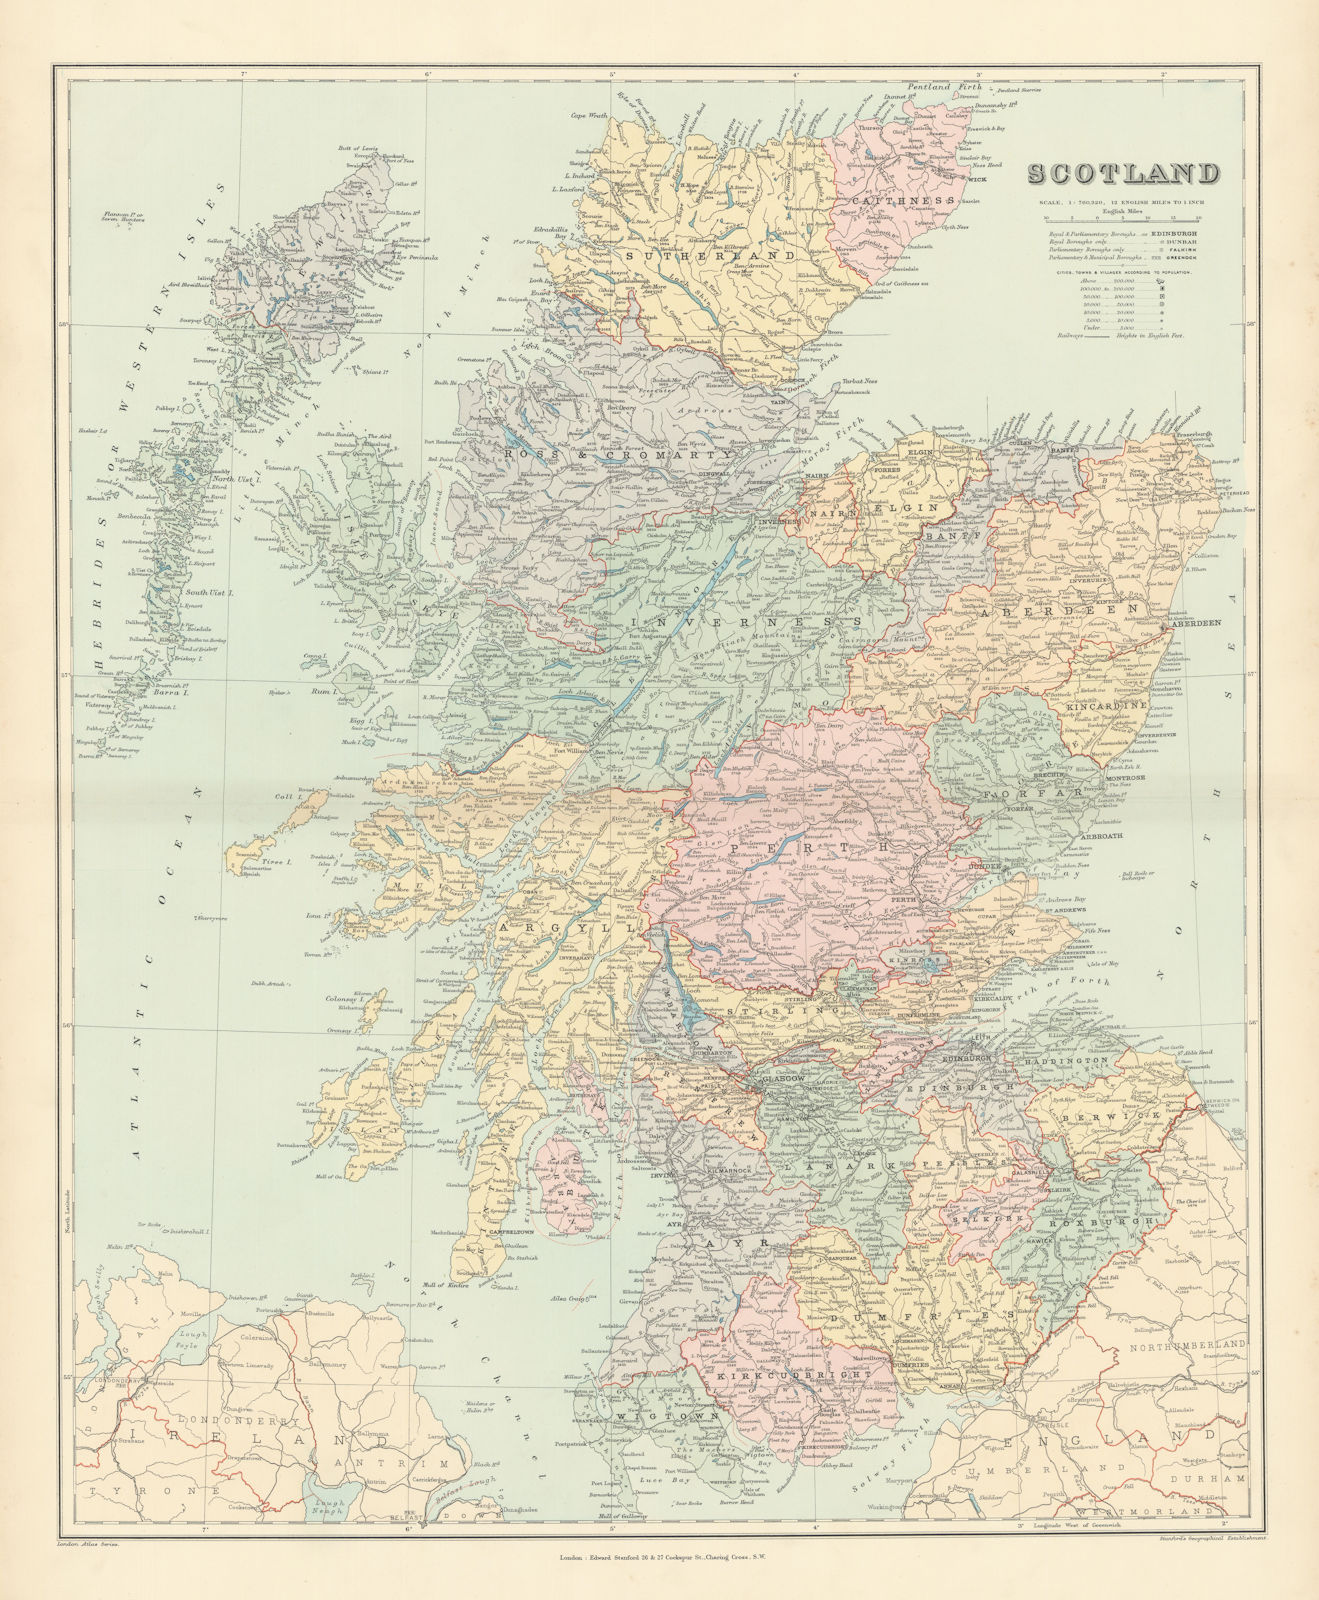 Scotland. Counties & railways. Large 66x54cm. STANFORD 1896 old antique map